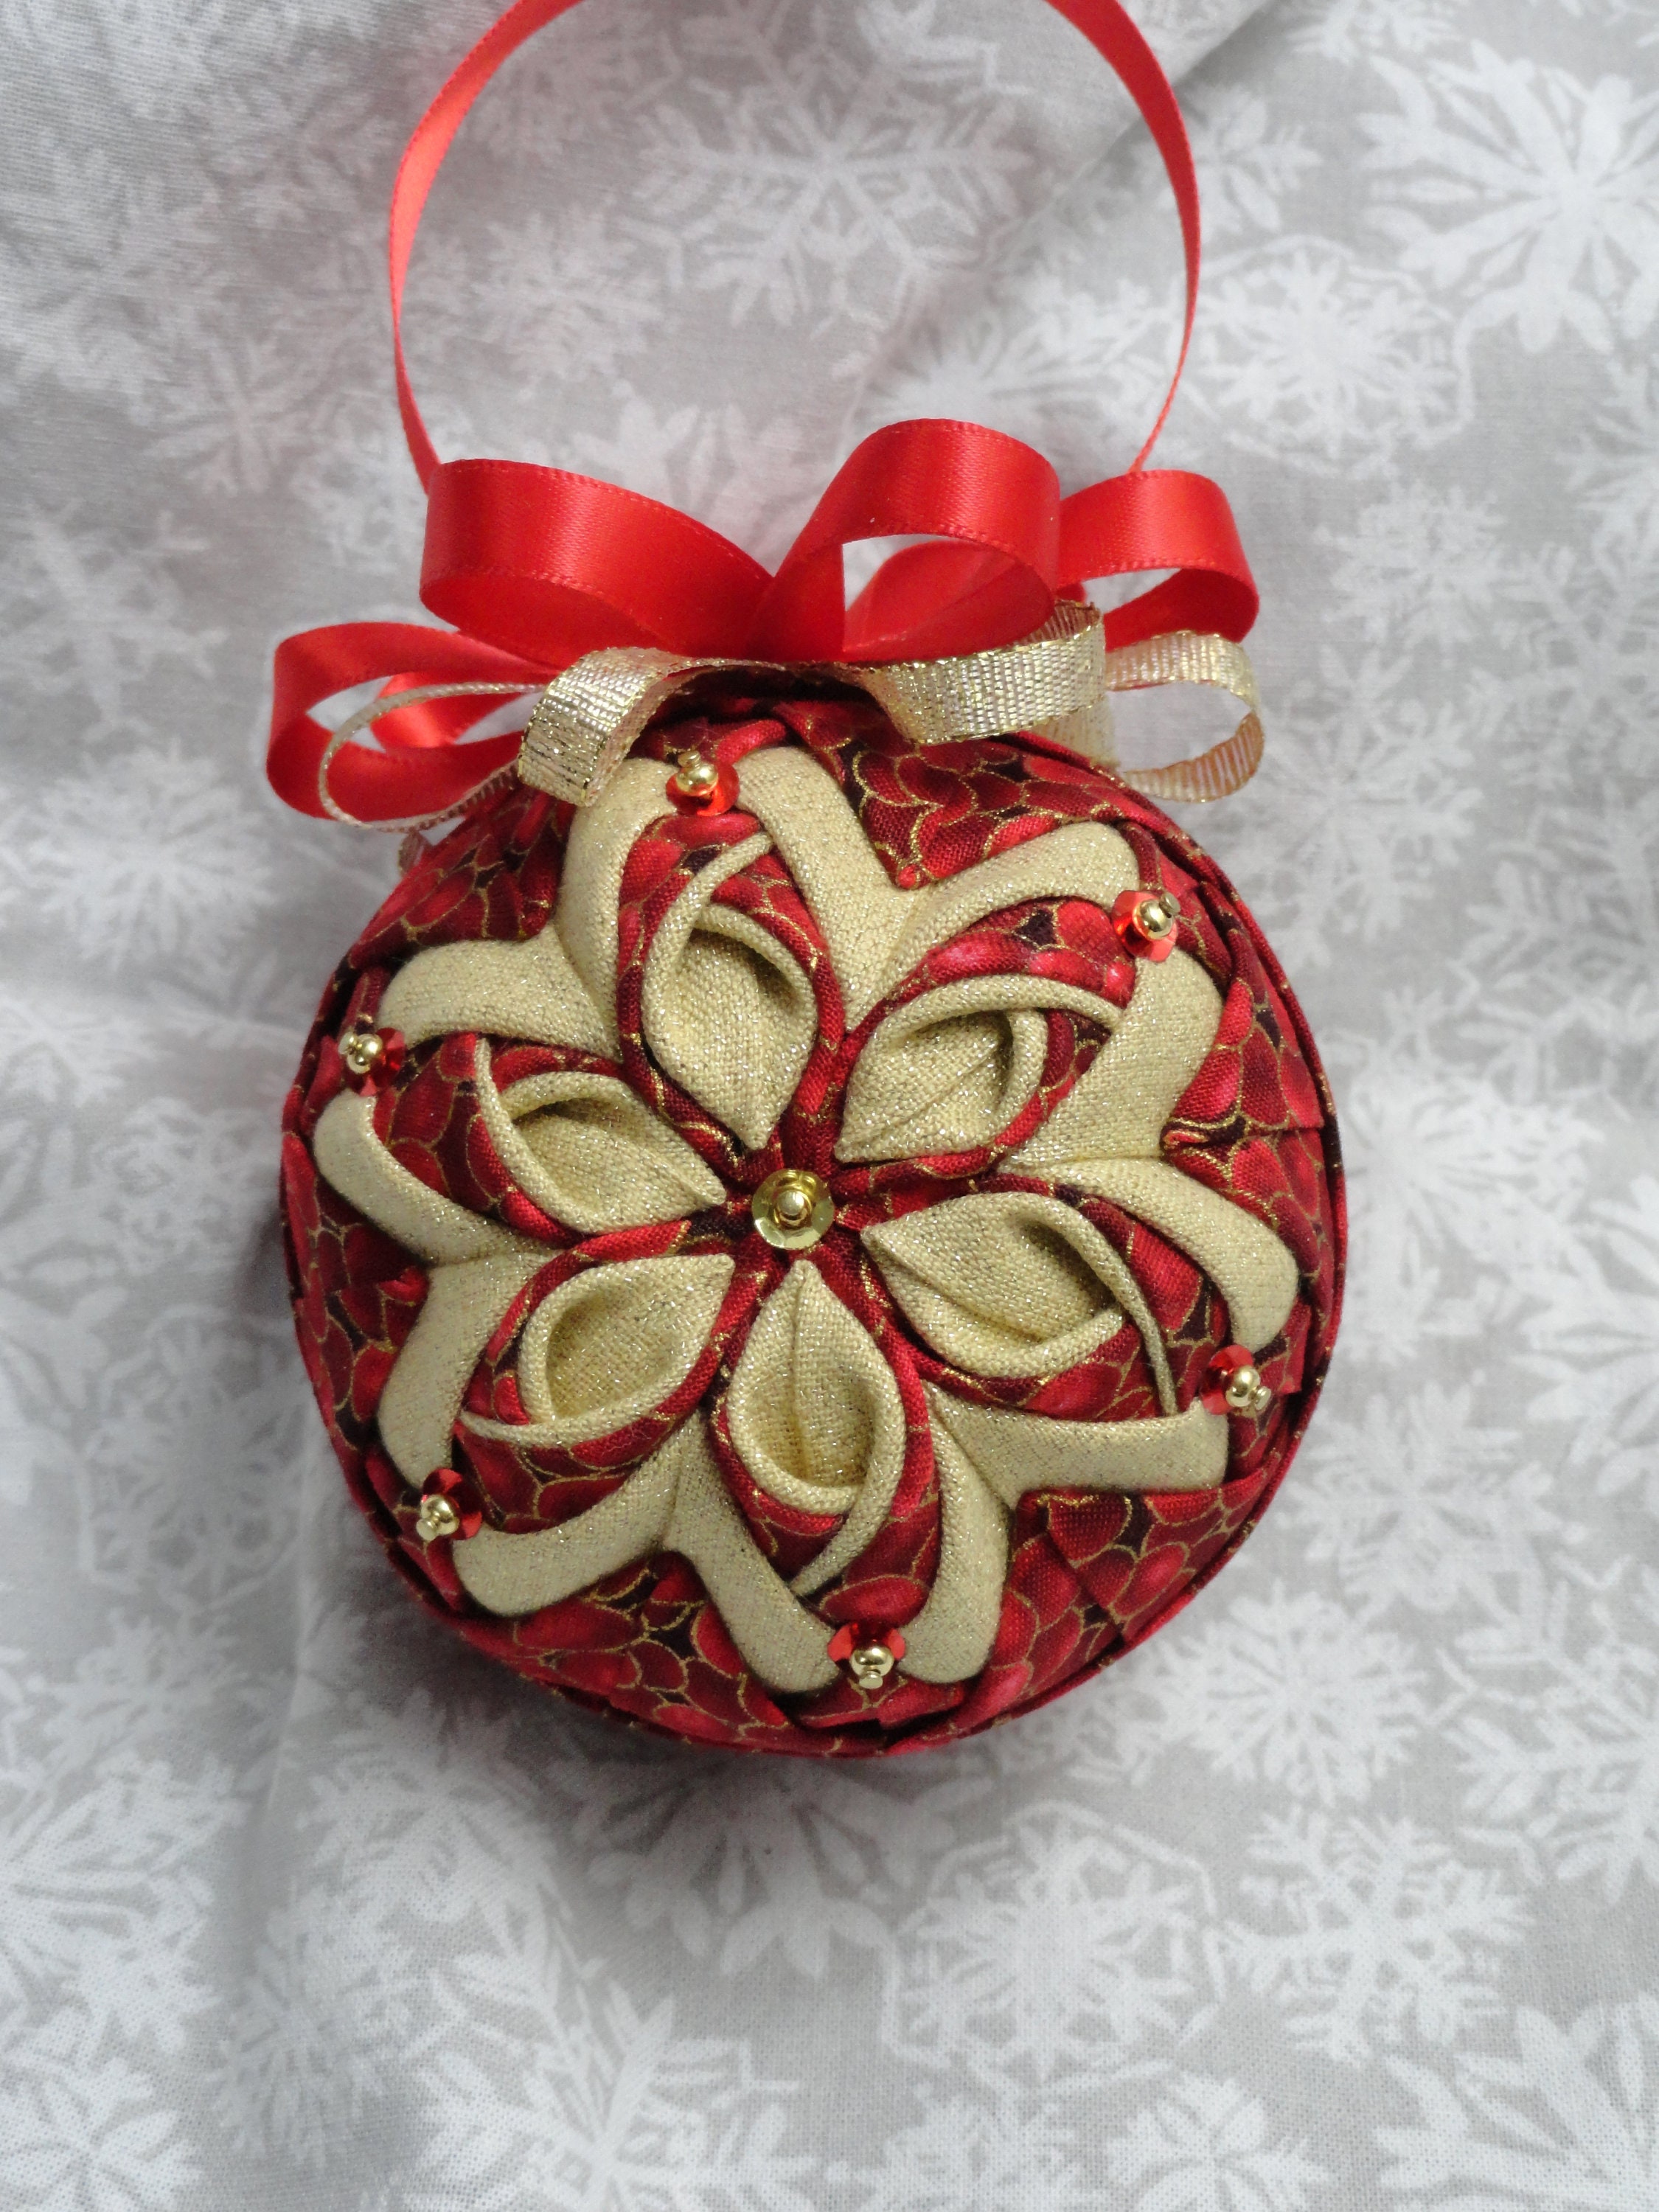 Keepsake Ornament Quilted Ornament Holiday Ornament Christmas Ornament White Poinsettia Pink Ornament Handmade Ornament